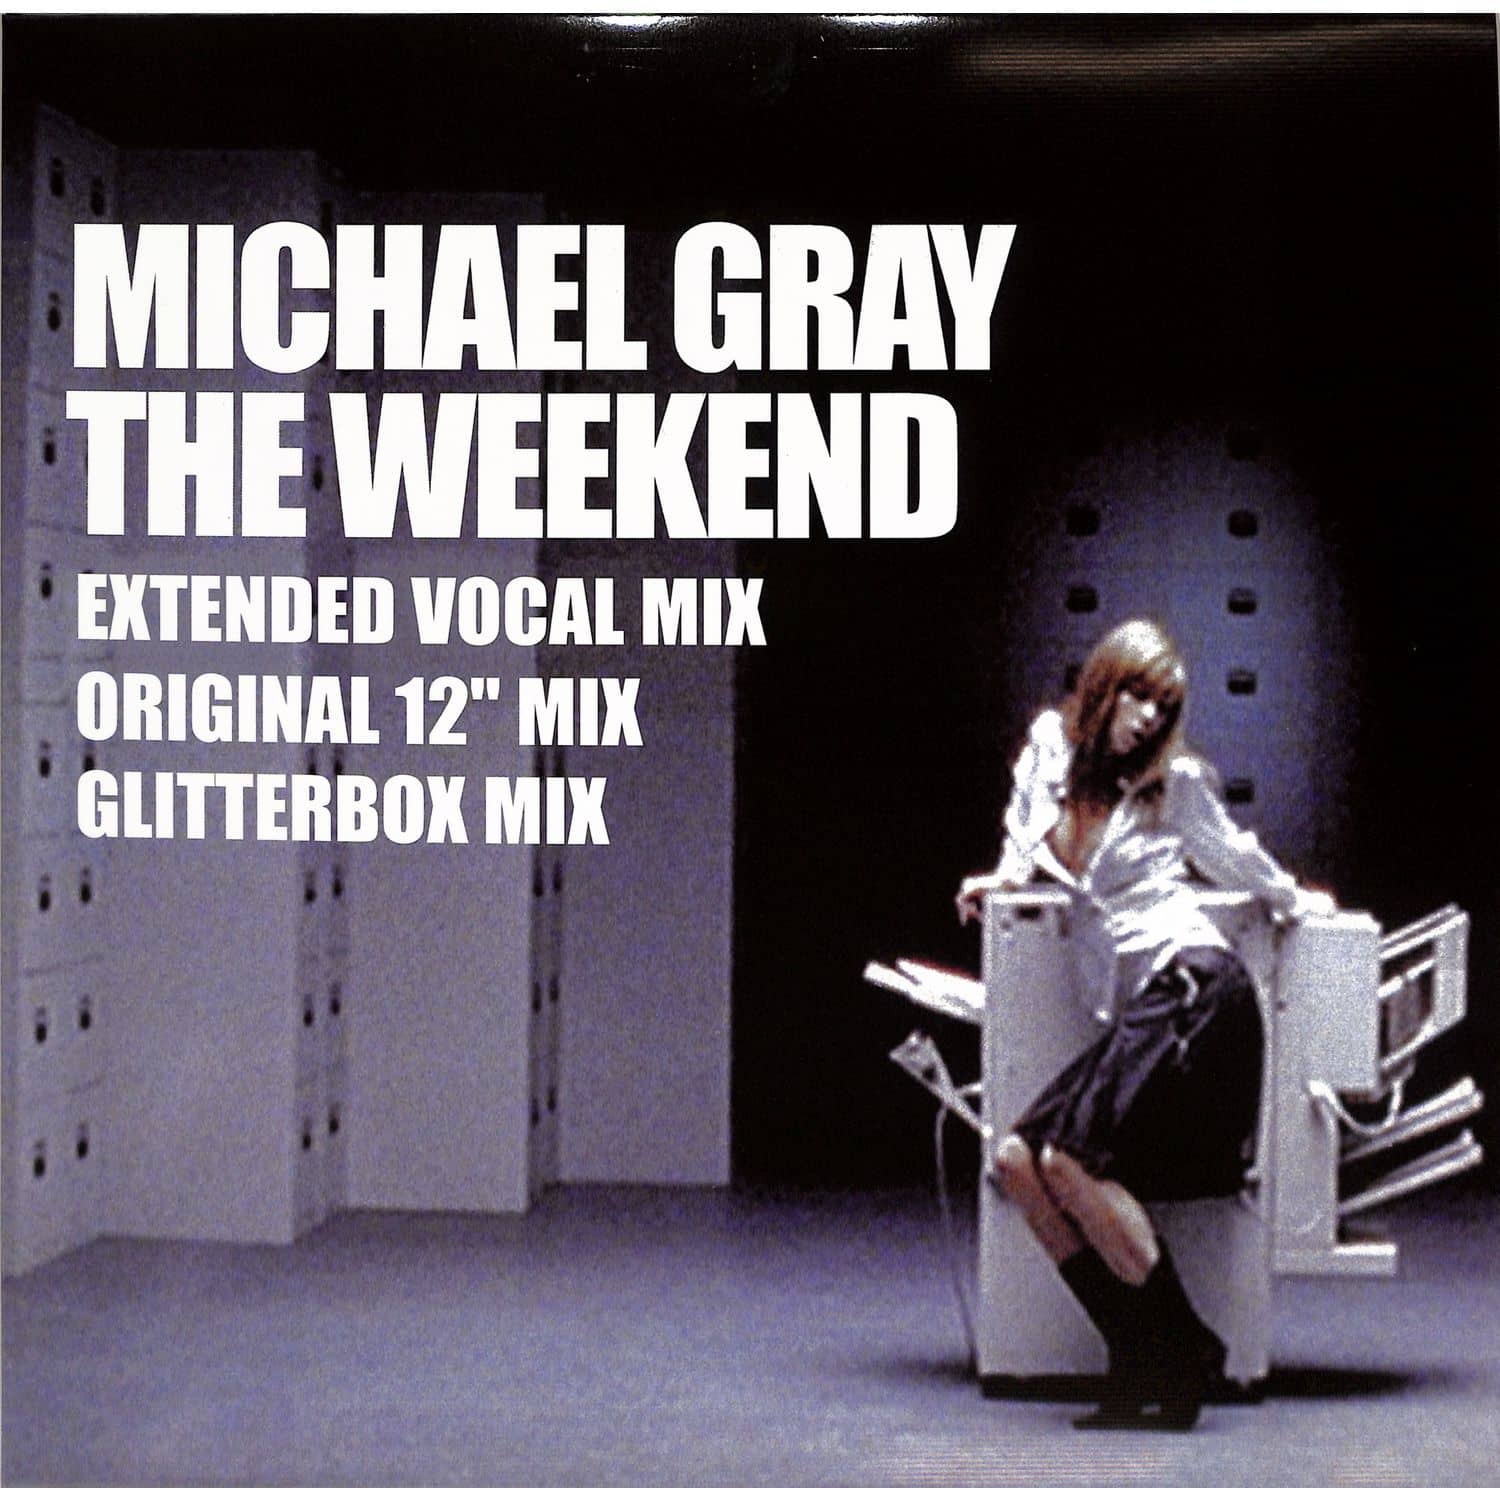 Michael Gray - THE WEEKEND